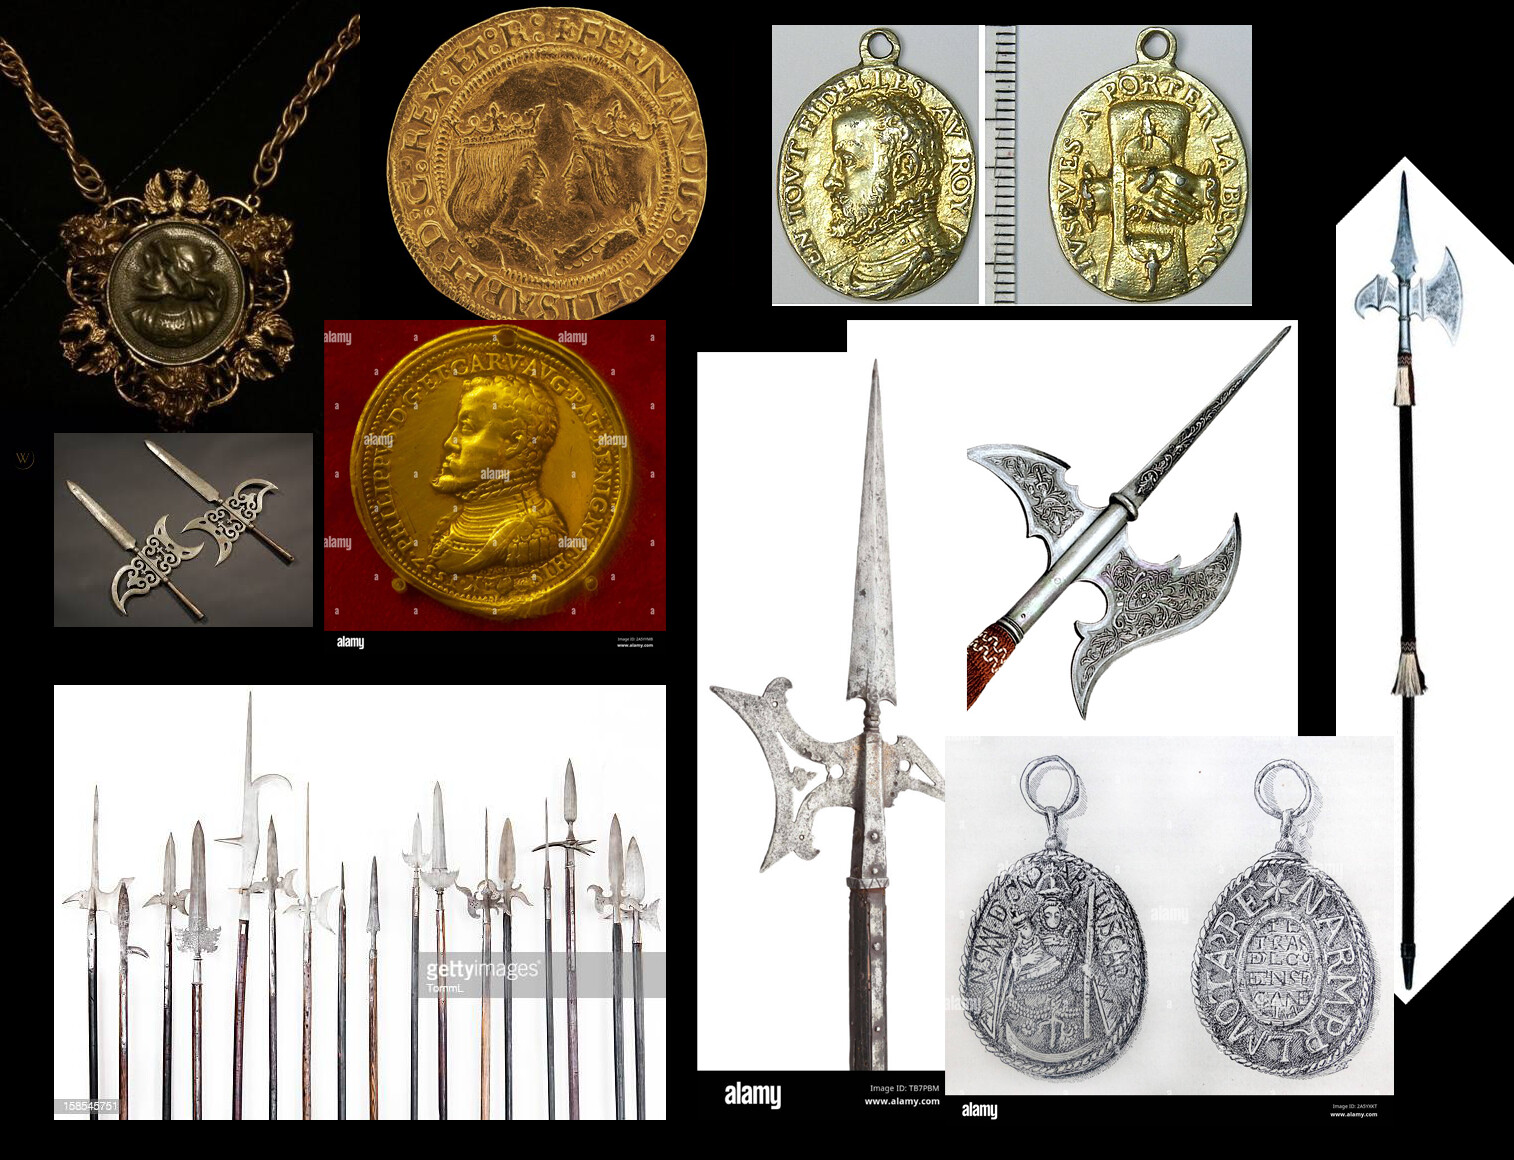 Reference for the medallion and halberd